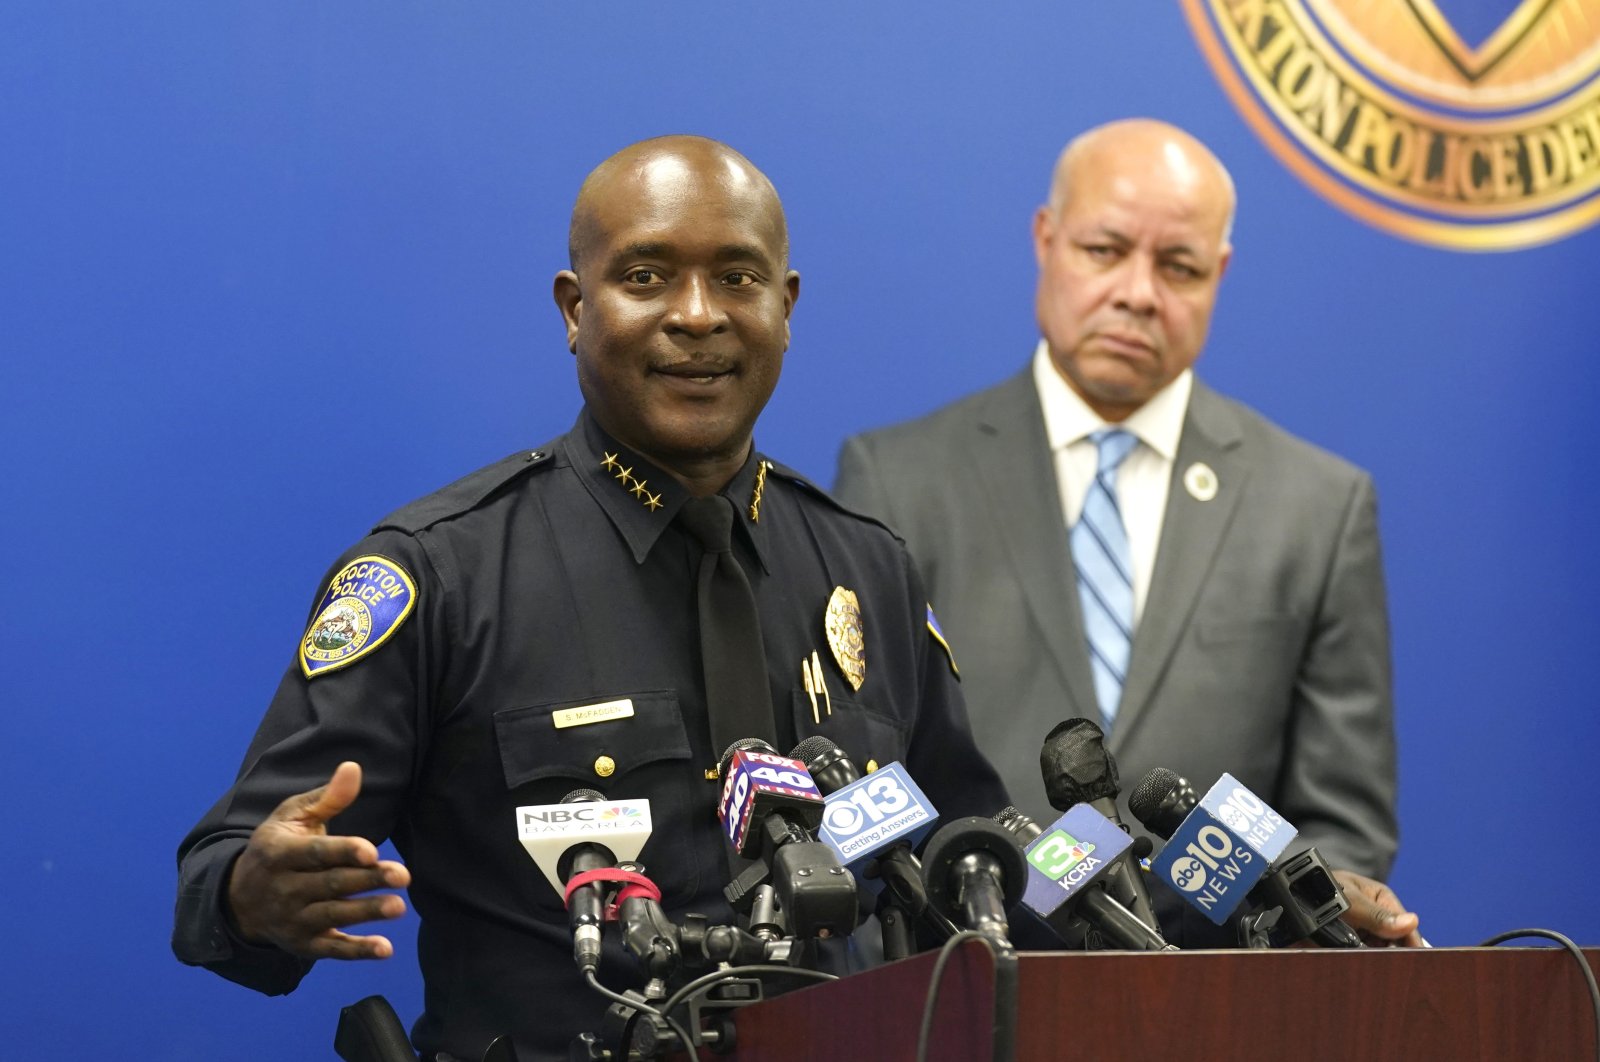 Stockton Police Chief Stanley McFadden, left, flanked by Stockton City Manager Harry Black, right, updates reporters about the investigation into the shooting deaths of six men and one woman during a news conference. Stockton, California, Oct. 4, 2022. (AP Photo)